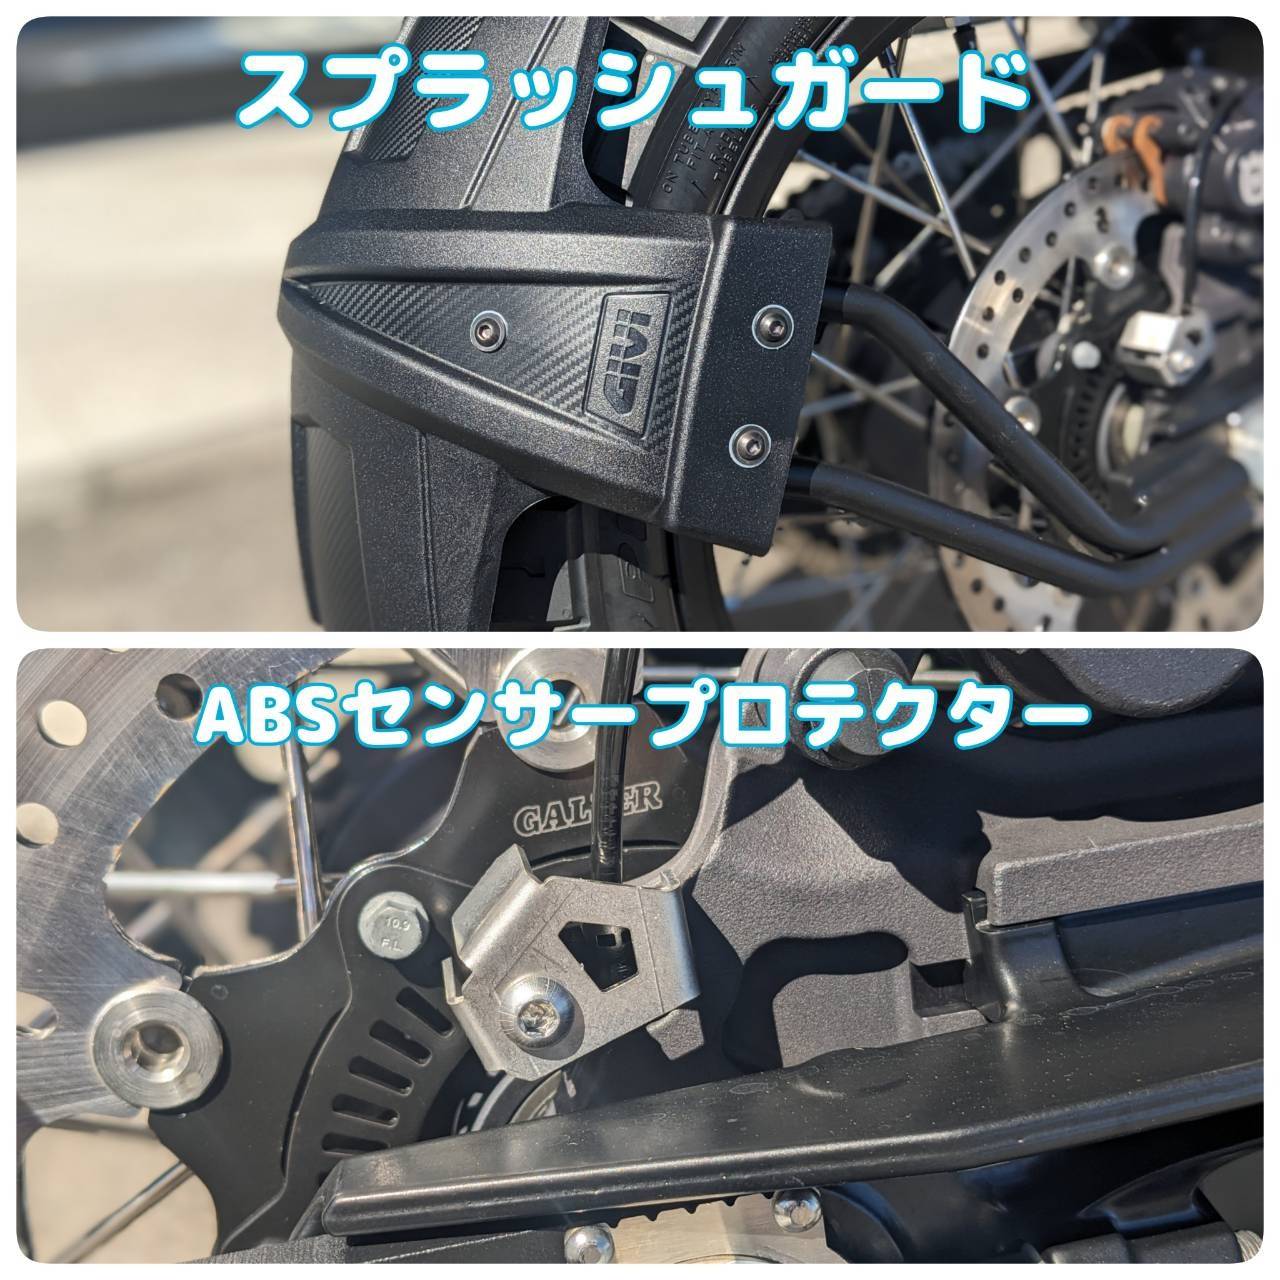 Norden901Expeditionカスタム紹介♪②　ハスクバーナモーターサイクルズ 山形